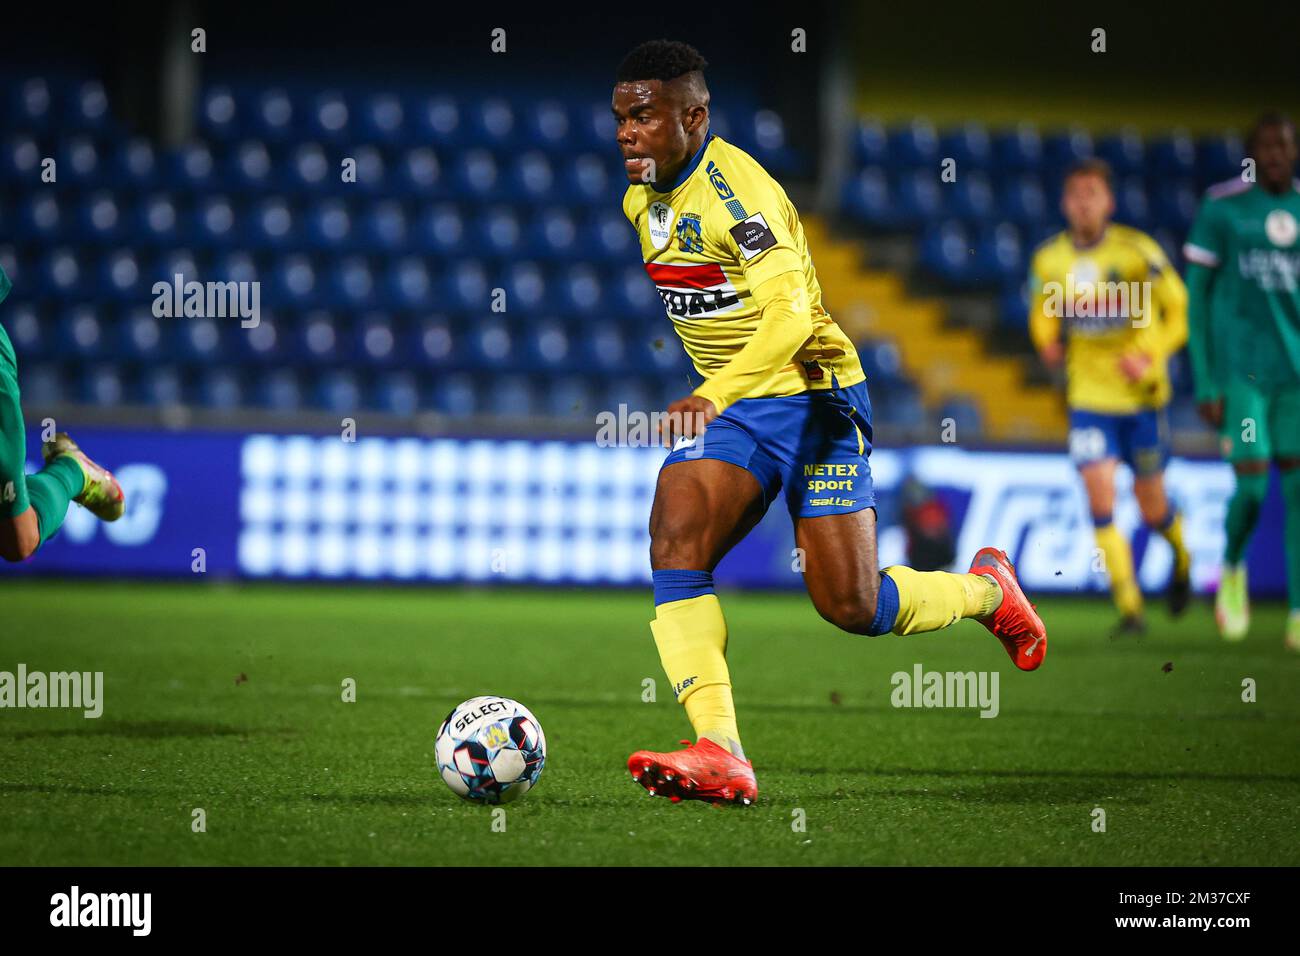 Westerlo's Kouya Mabea pictured during a soccer match between KVC Westerlo and RE Virton, Sunday 19 December 2021 in Westerlo, on day 16 of the '1B Pro League' second division of the Belgian soccer championship. BELGA PHOTO DAVID PINTENS Stock Photo